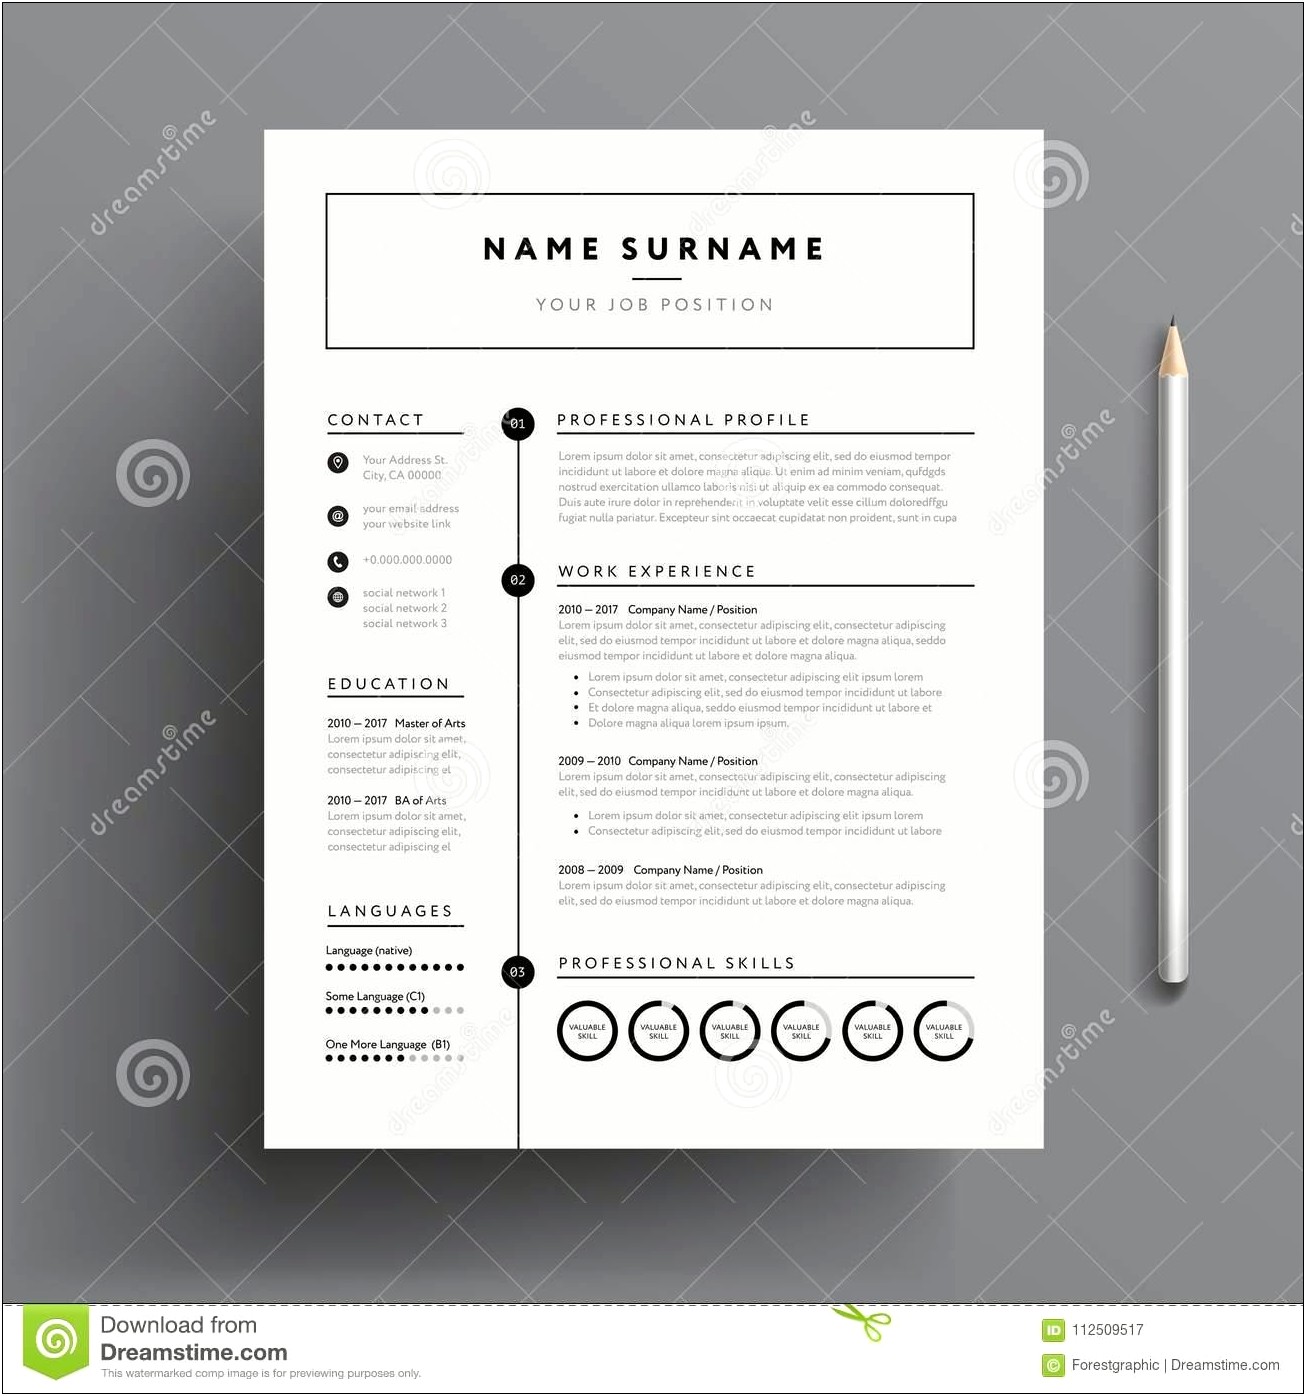 Free Professional Resume Template 2017